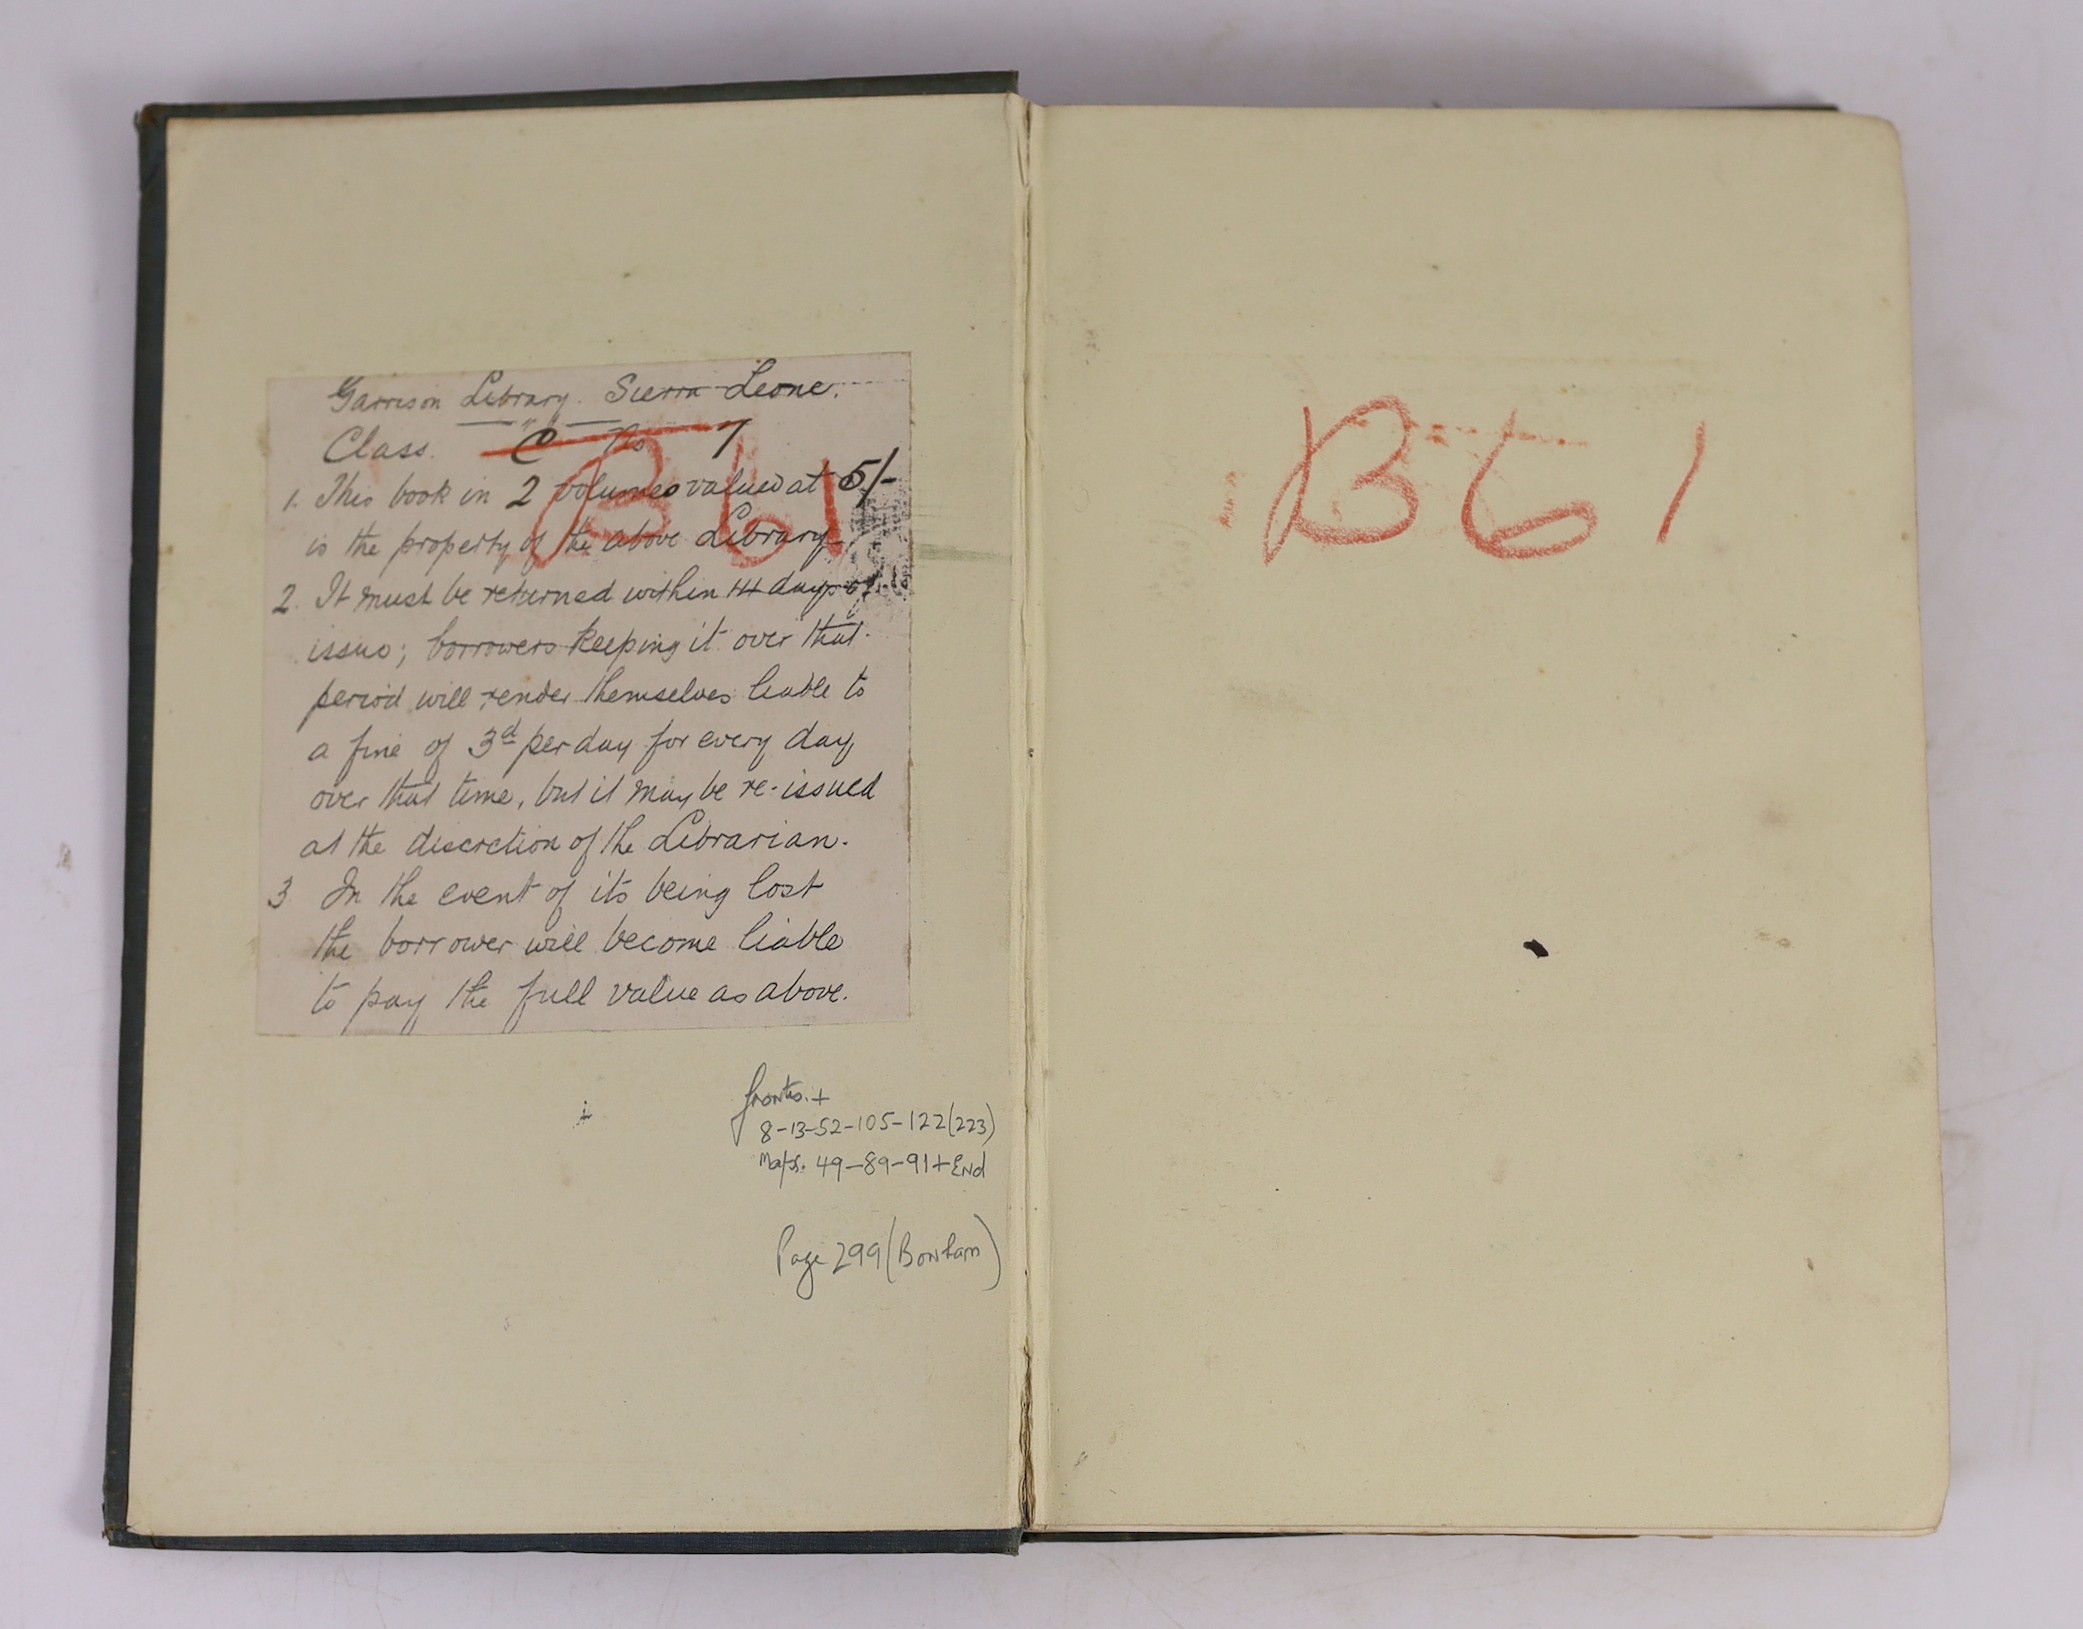 Keppel, Henry,Sir - The Expedition to Borneo of H.M.S Dido, 3rd edition, 2 vols, 8vo, original cloth, with 2 frontises, 8 plates and 6 folded maps, pencil fly leaf inscribed ‘’This copy belonged to Admiral C.B. Bonham [1